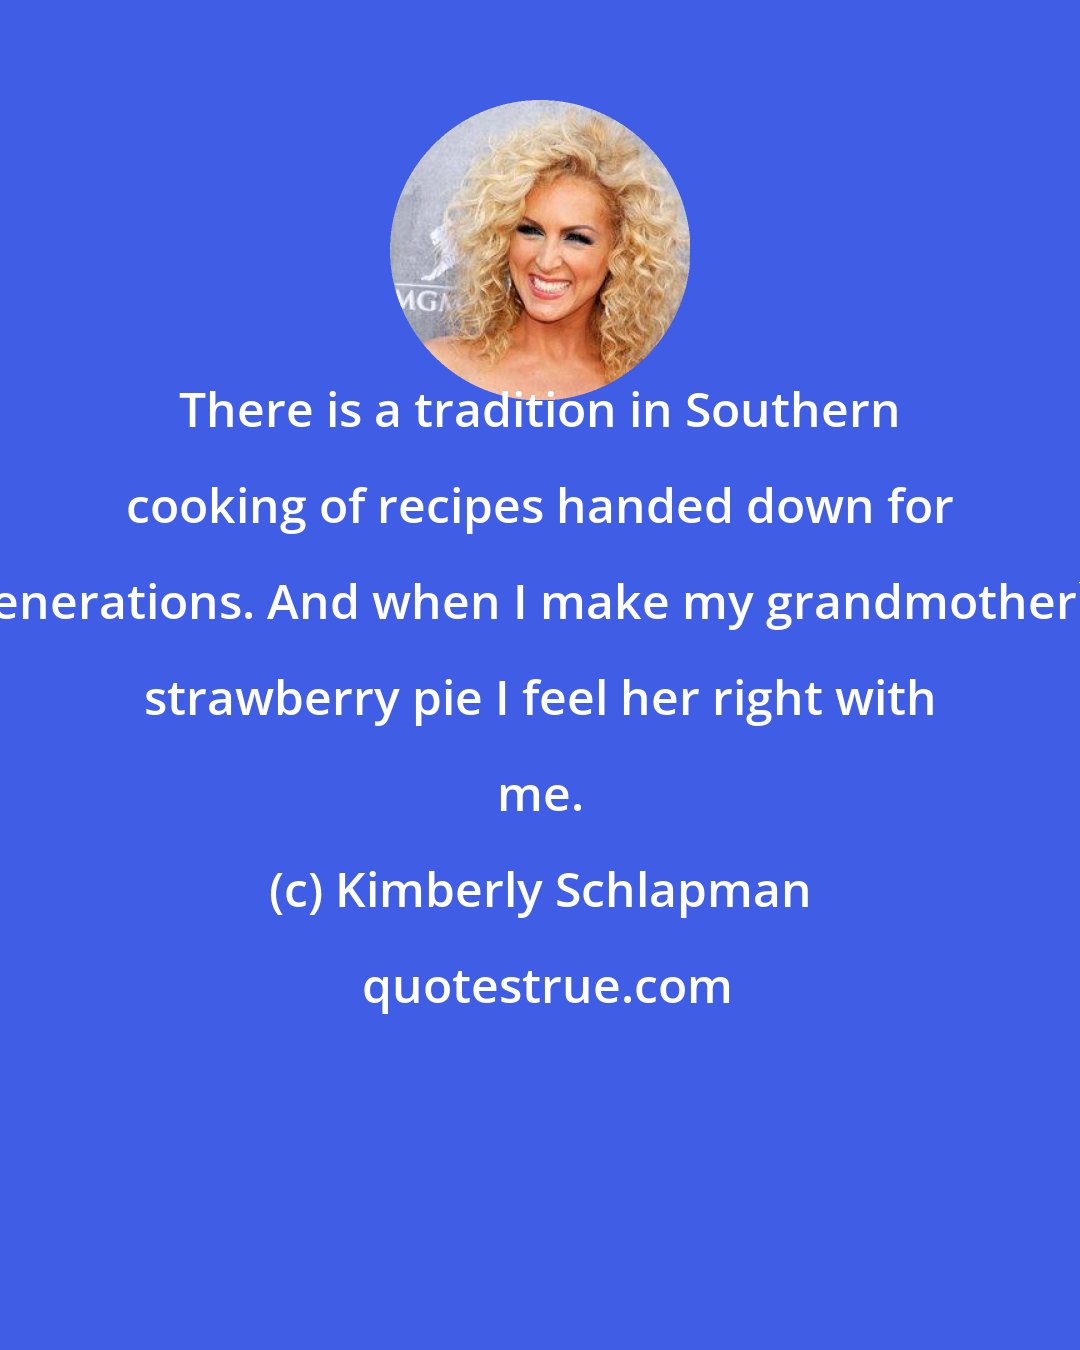 Kimberly Schlapman: There is a tradition in Southern cooking of recipes handed down for generations. And when I make my grandmother's strawberry pie I feel her right with me.